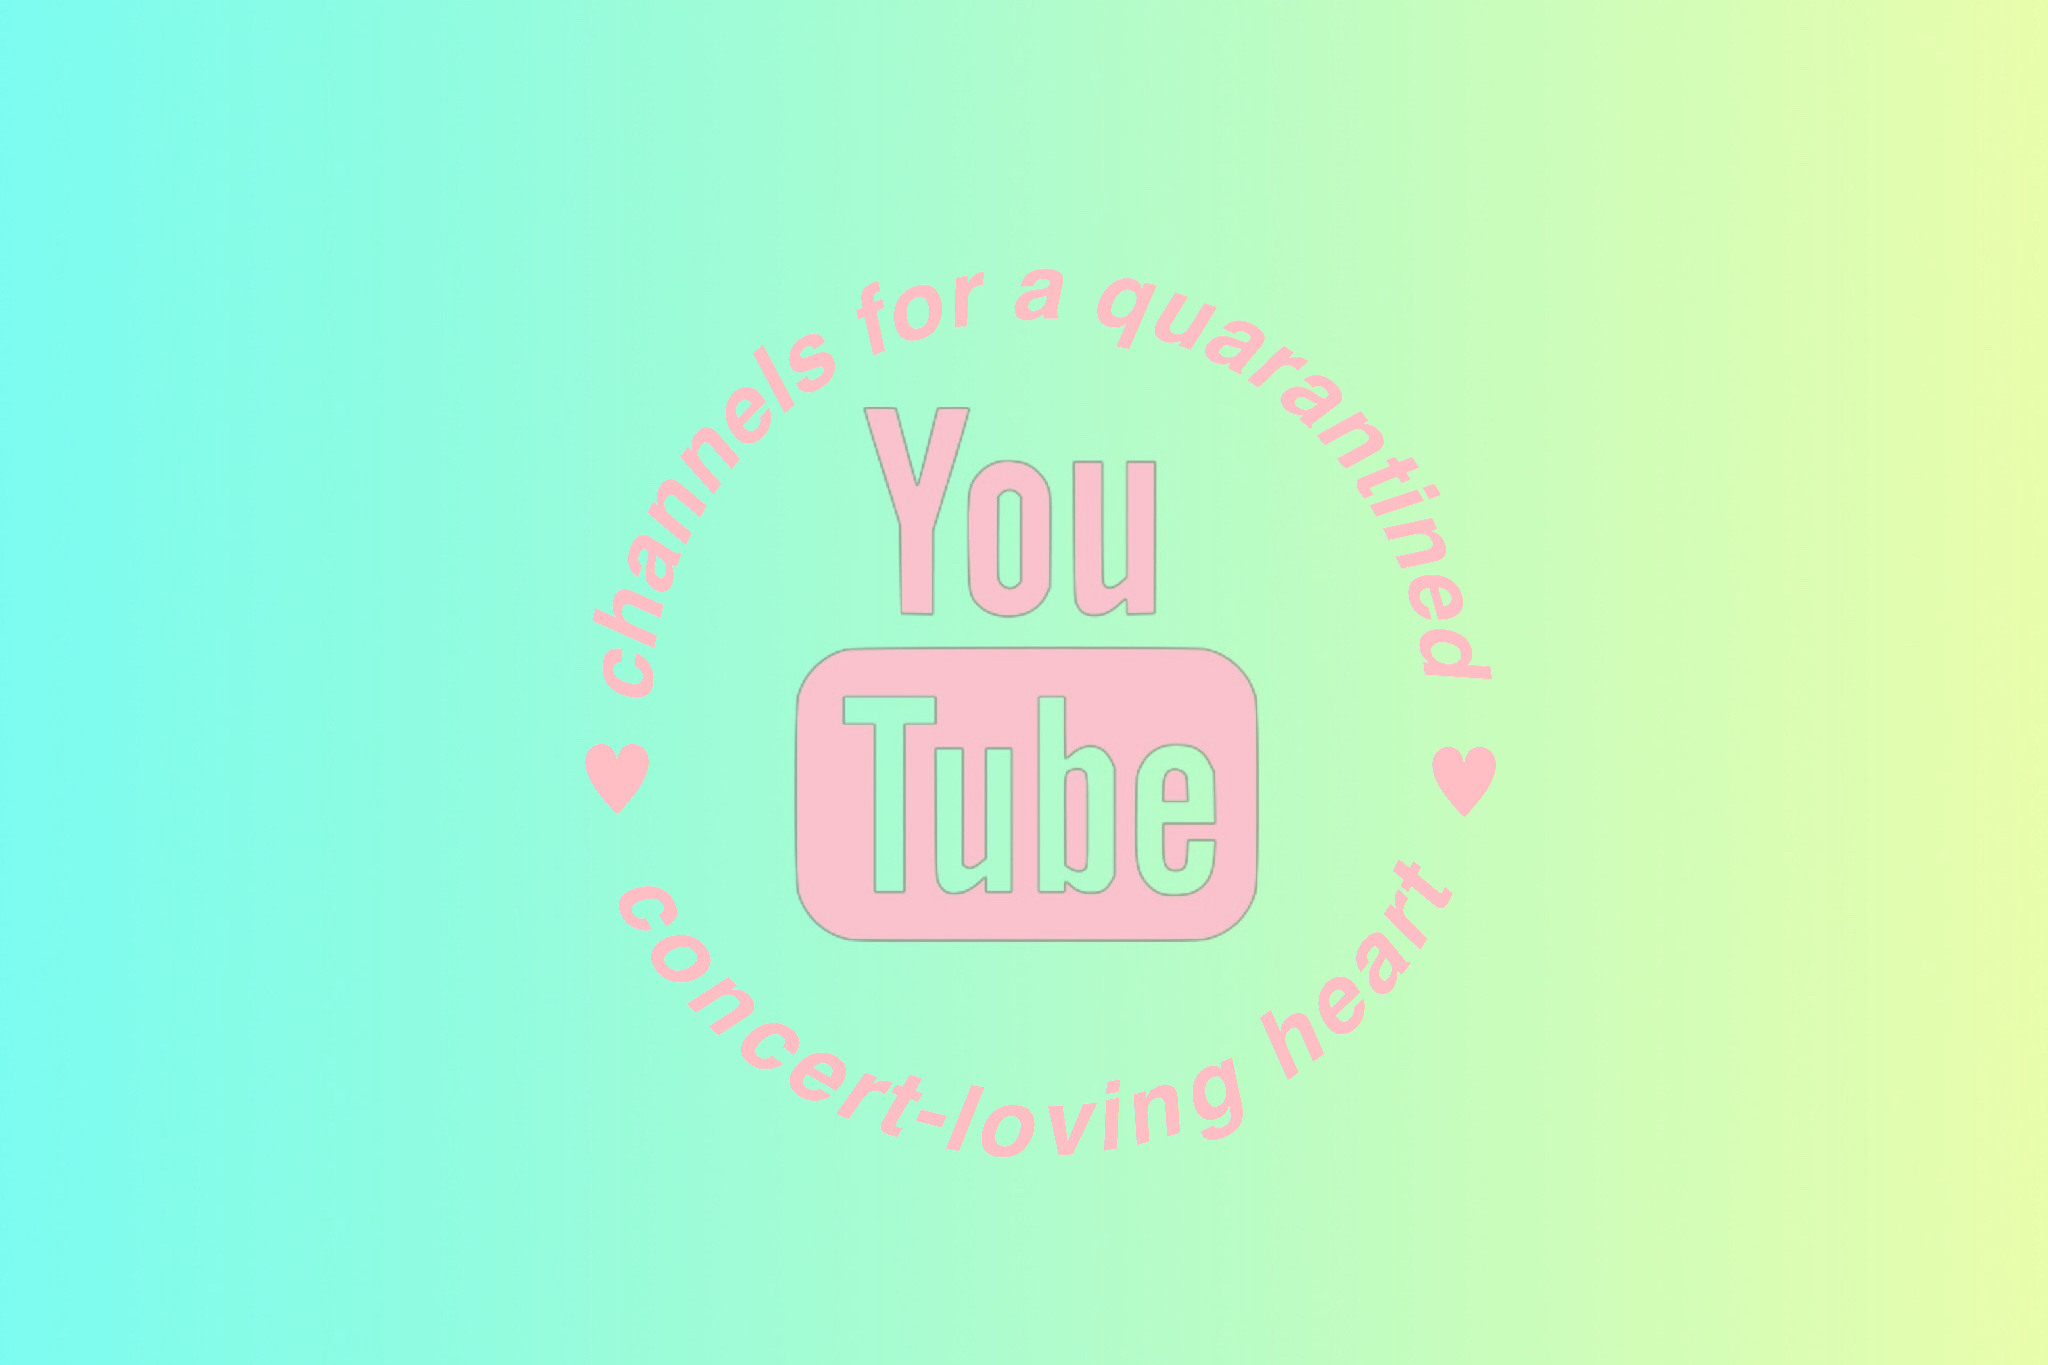 In the background you can see a blue to yellow gradient. In the foreground the youtube logo is in the center with the words, “channels for a quarantined heart” going around it in a circle. All text is in a baby pink color.